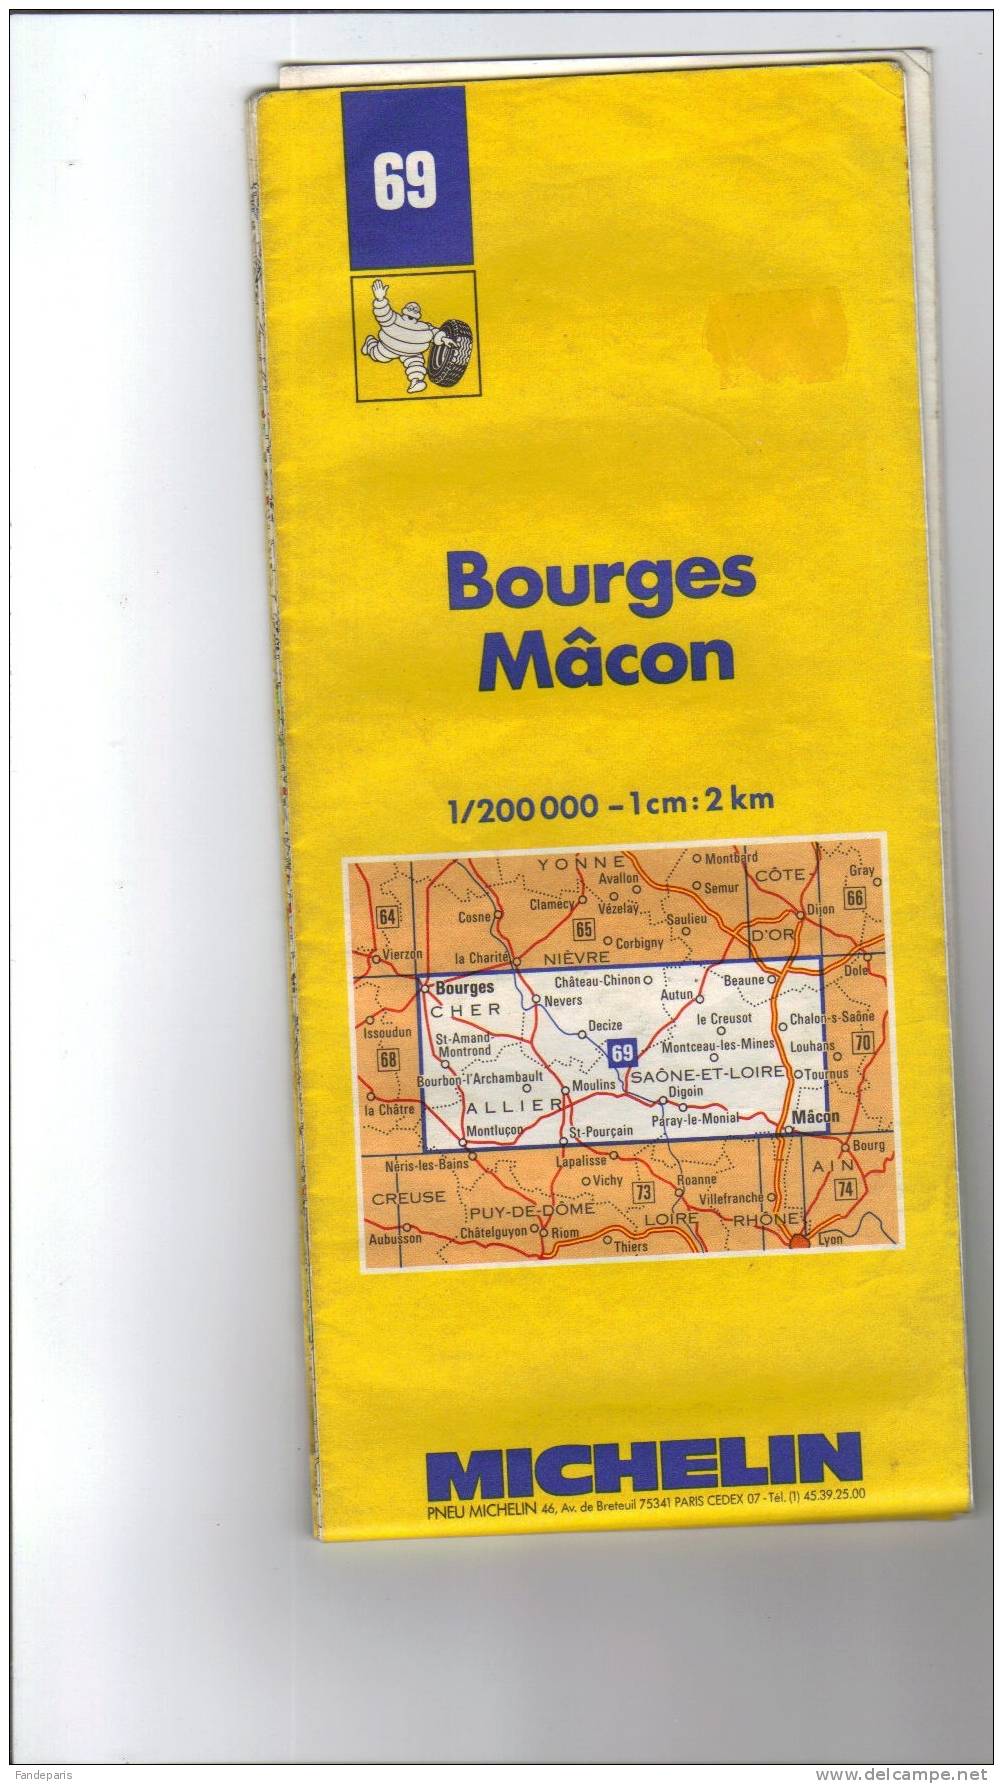 CARTES ROUTIERES  // FRANCE  //   BOURGES - MACON  / MICHELIN  / N° 69 - Carte Stradali